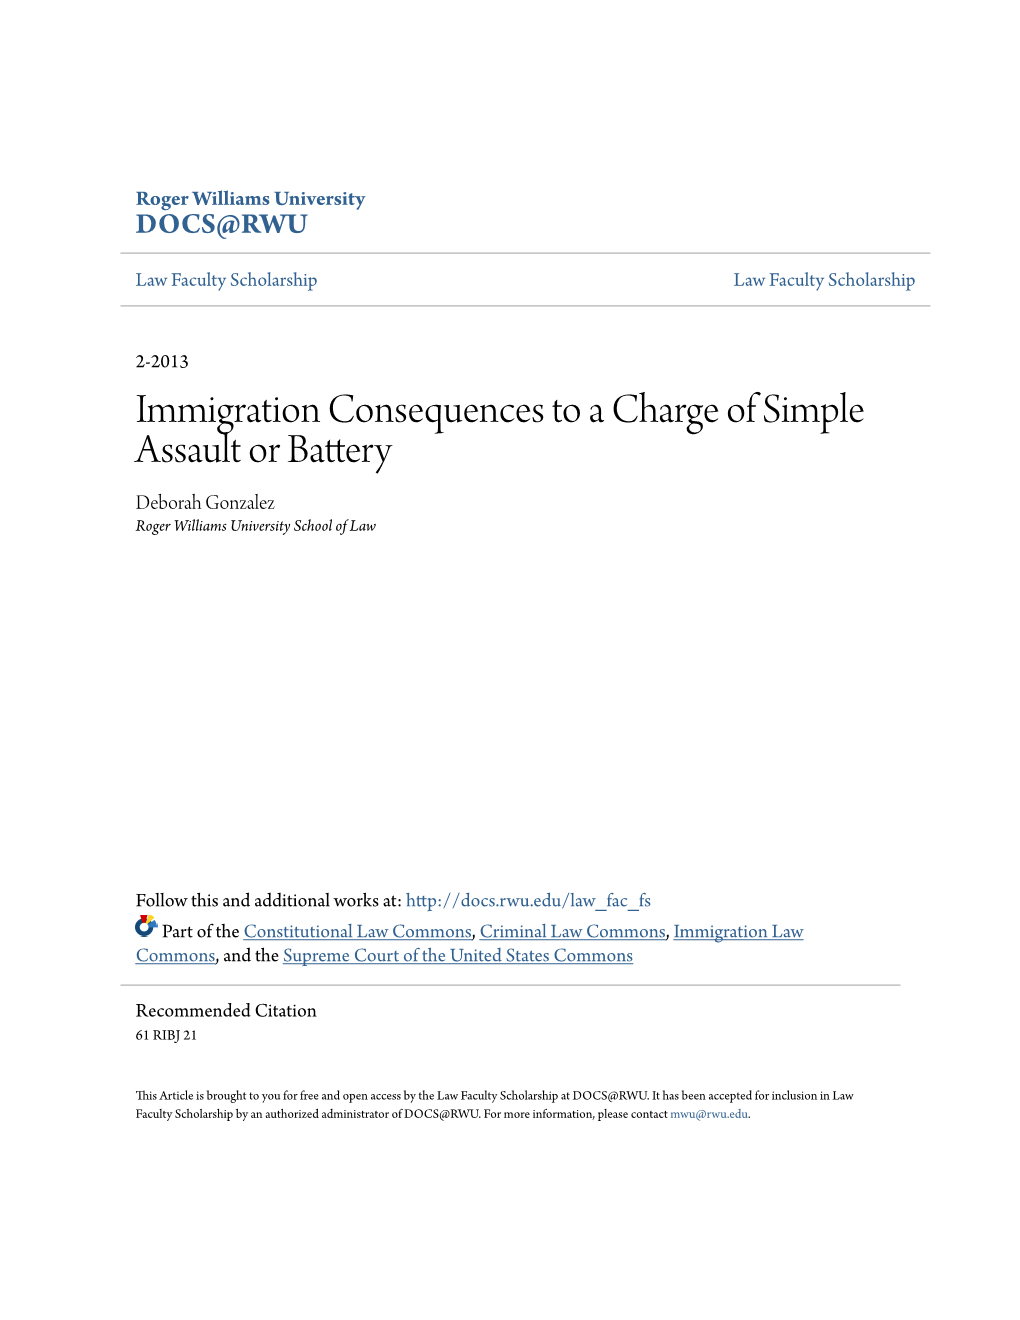 Immigration Consequences to a Charge of Simple Assault Or Battery Deborah Gonzalez Roger Williams University School of Law